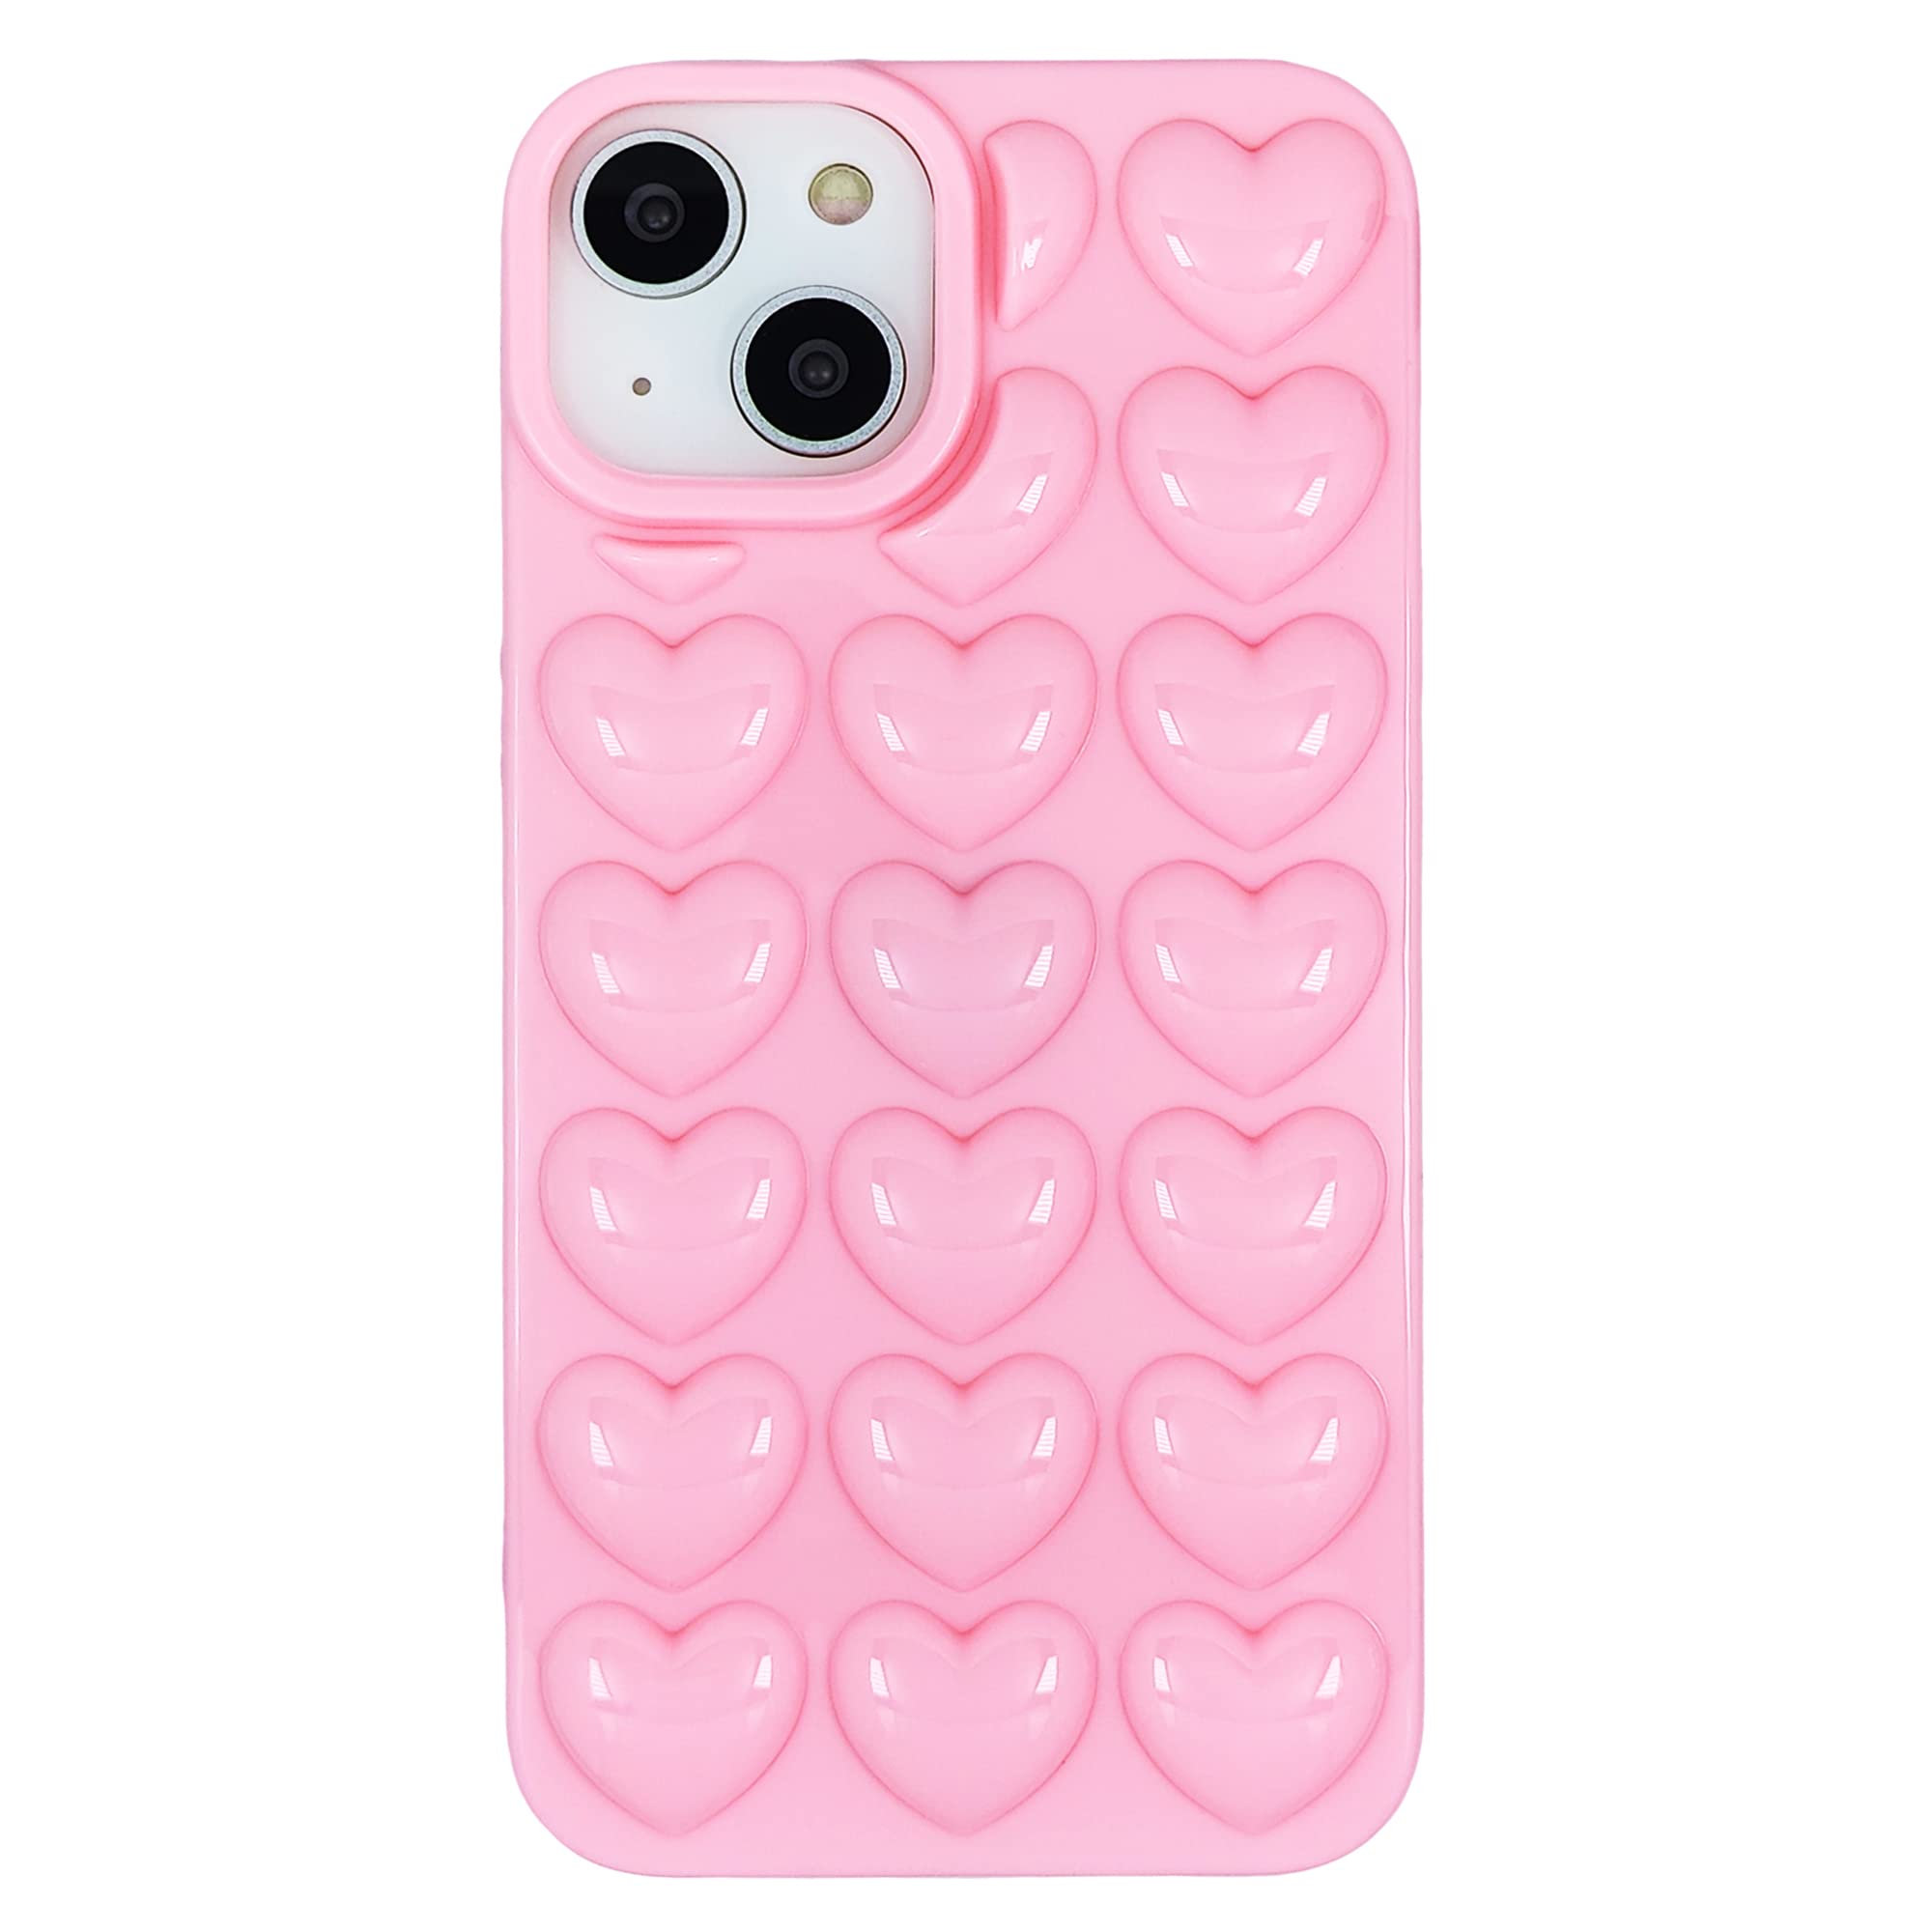 DMaos iPhone 15 Pro Max Case for Women, 3D Pop Bubble Heart Kawaii Gel Cover, Cute Girly for iPhone15 Pro Max 6.7 inch - Pink